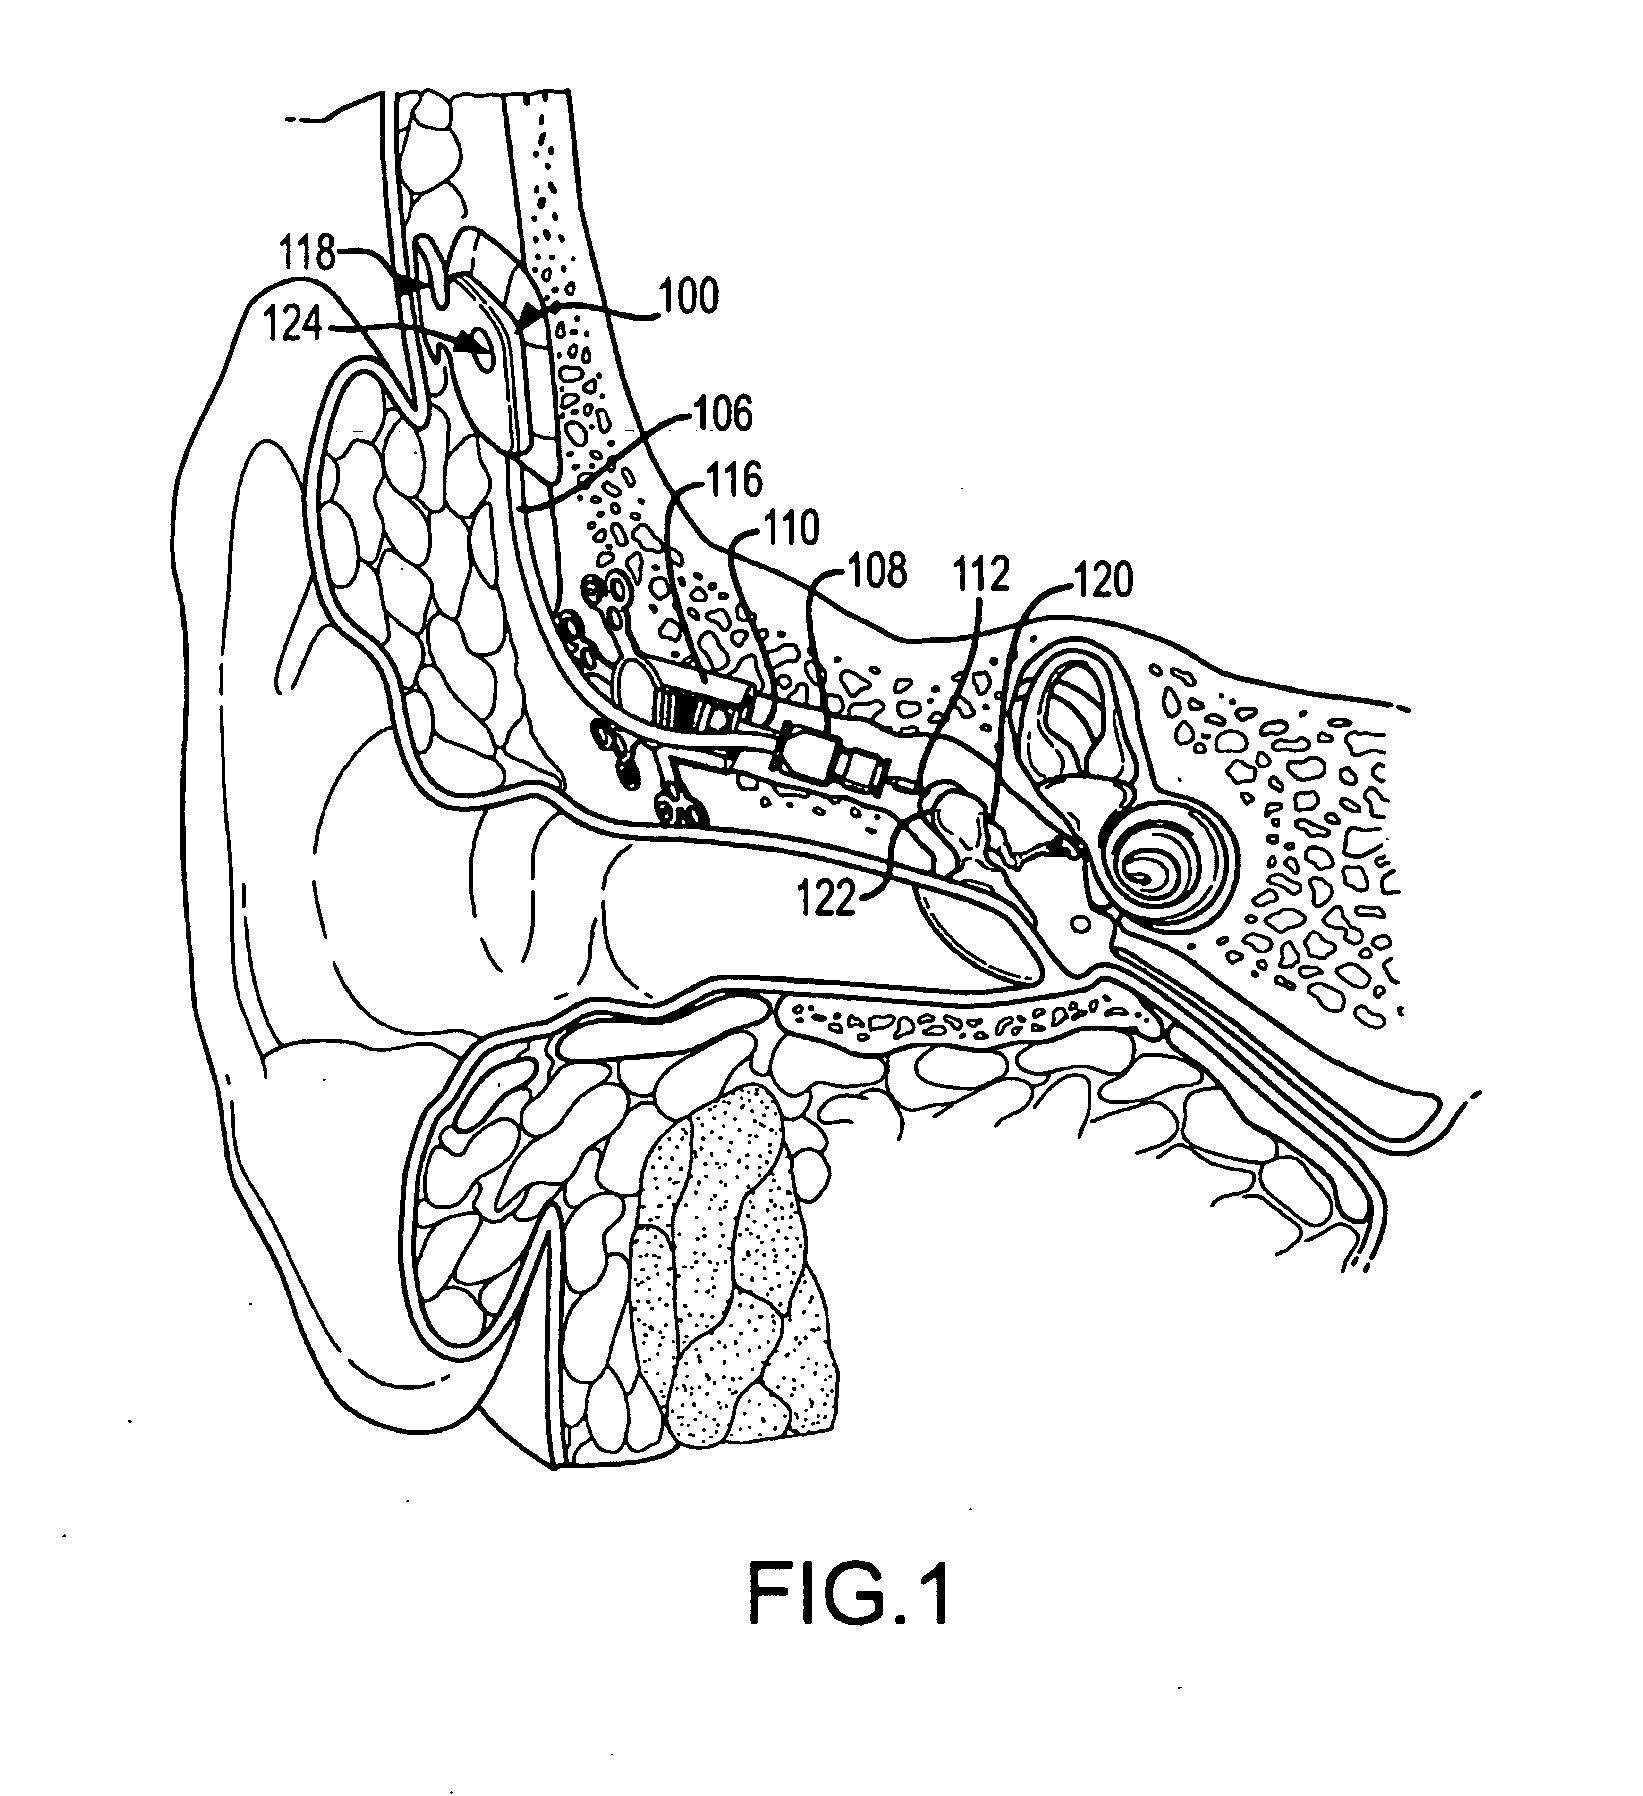 Fluid cushion support for implantable device